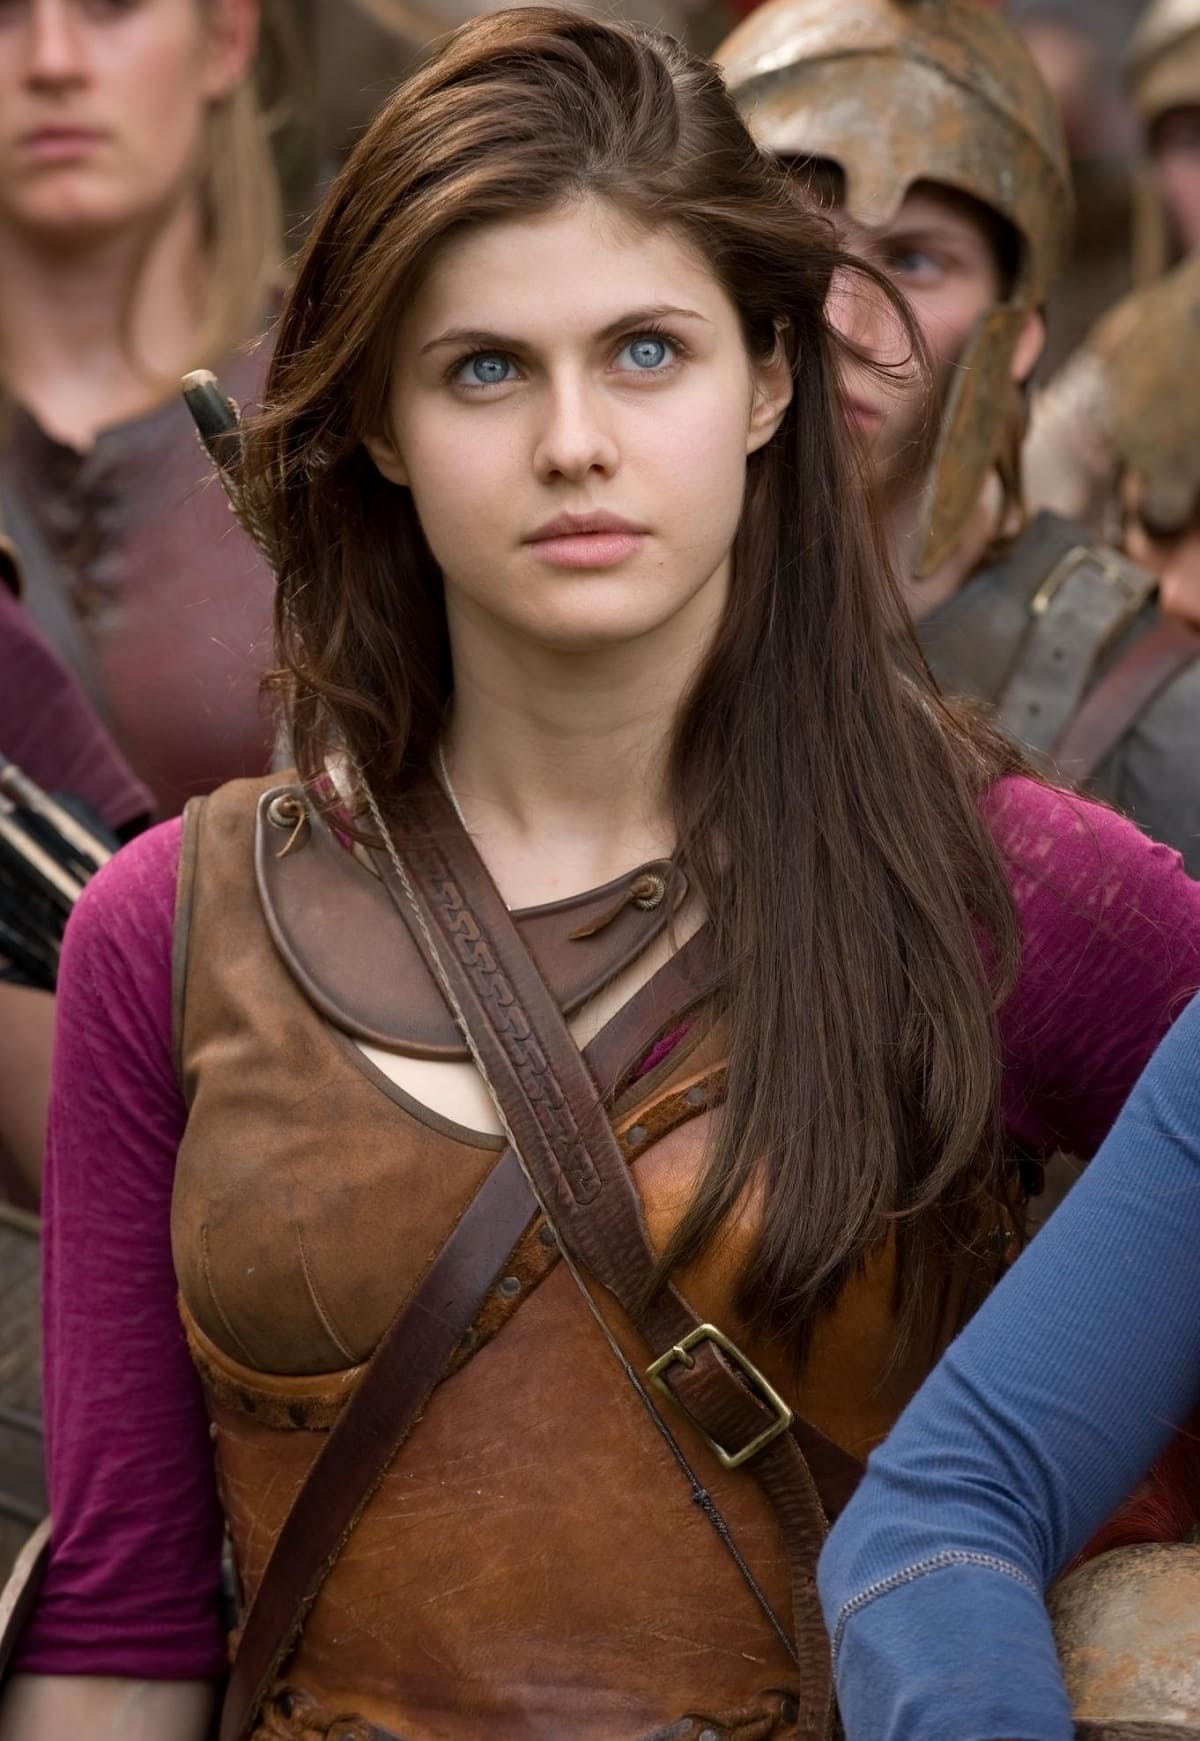 With her piercing blue eyes and magnetic charm, Alexandra Daddario captivated audiences as Annabeth Chase in the Percy Jackson film series